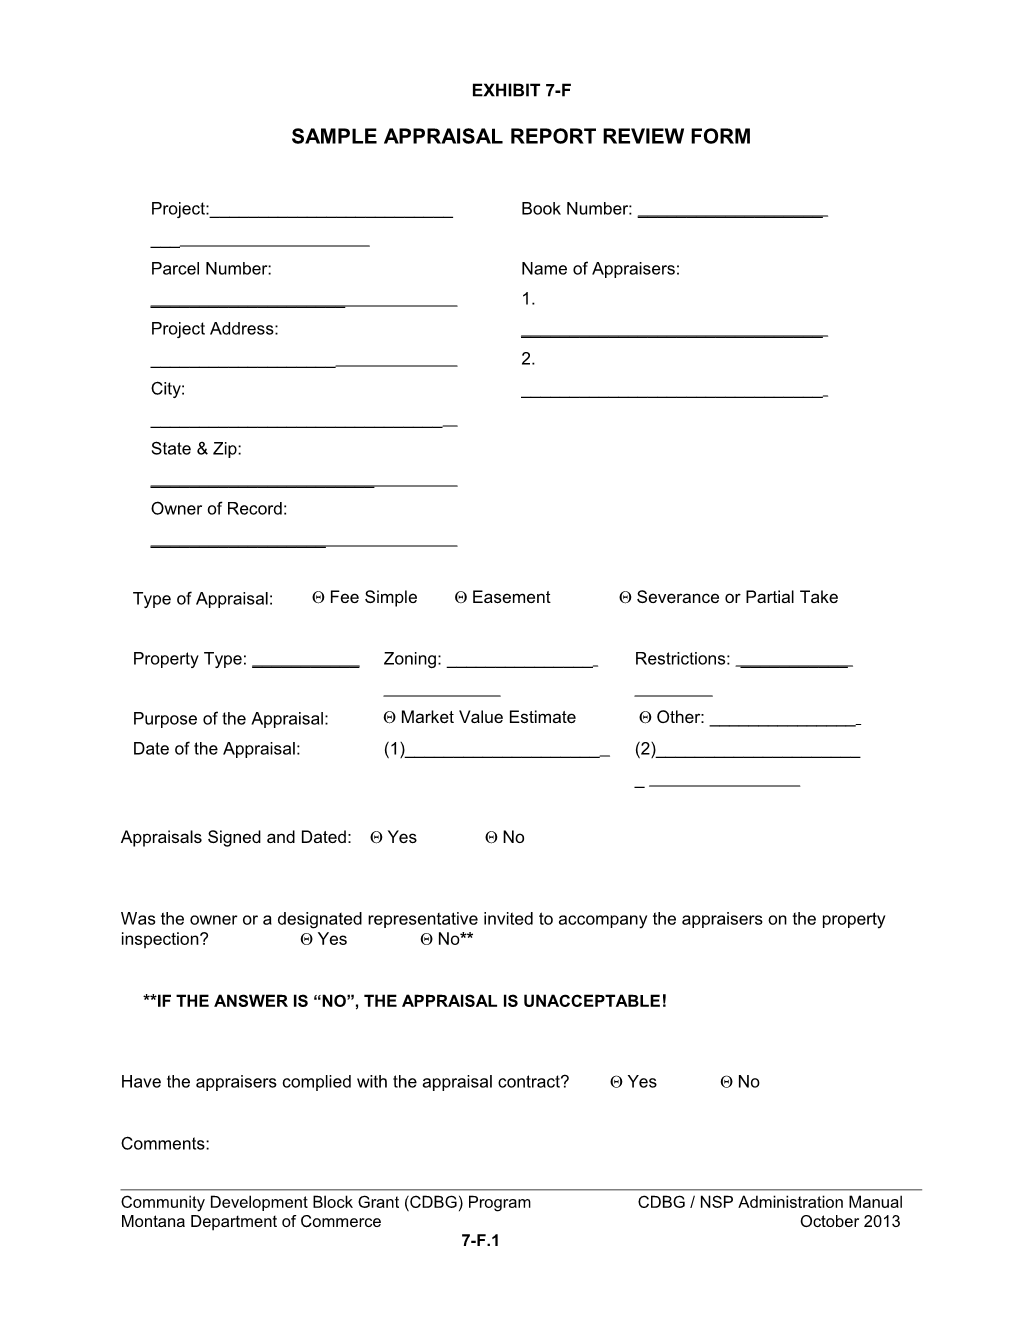 Sample Appraisal Report Review Form